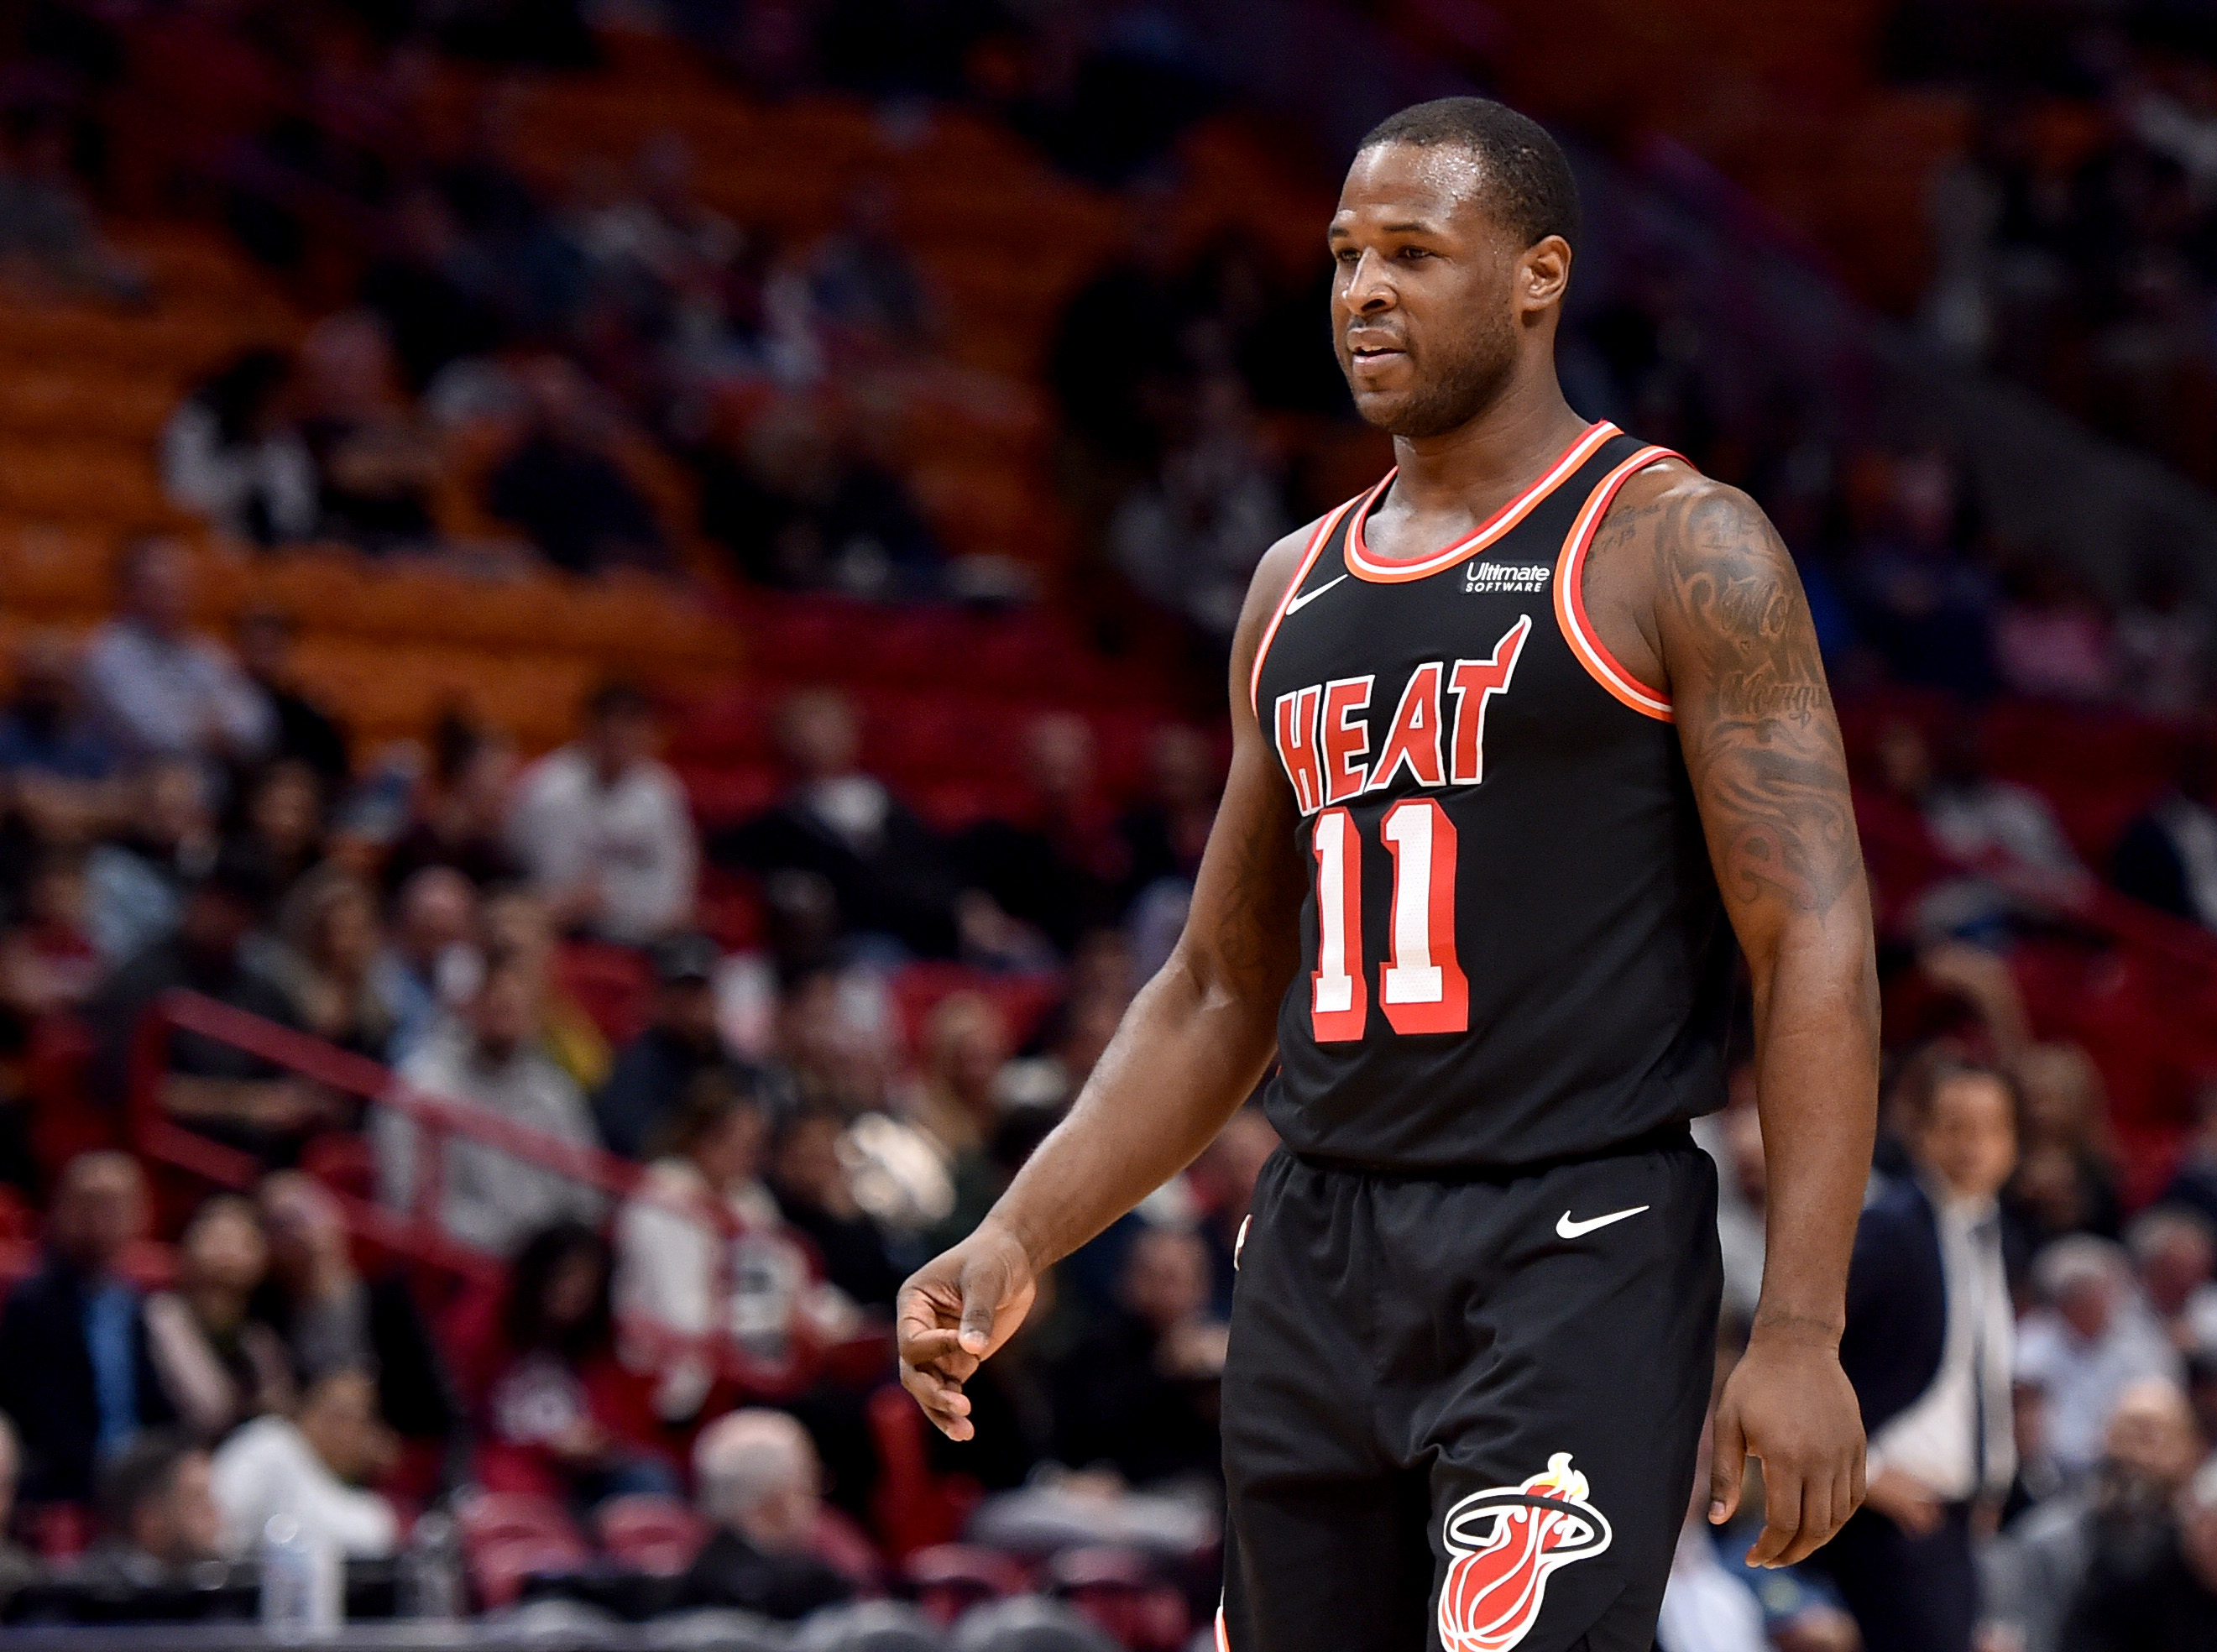 Dion Waiters roasted for looking overweight in team photo | The Sports ...